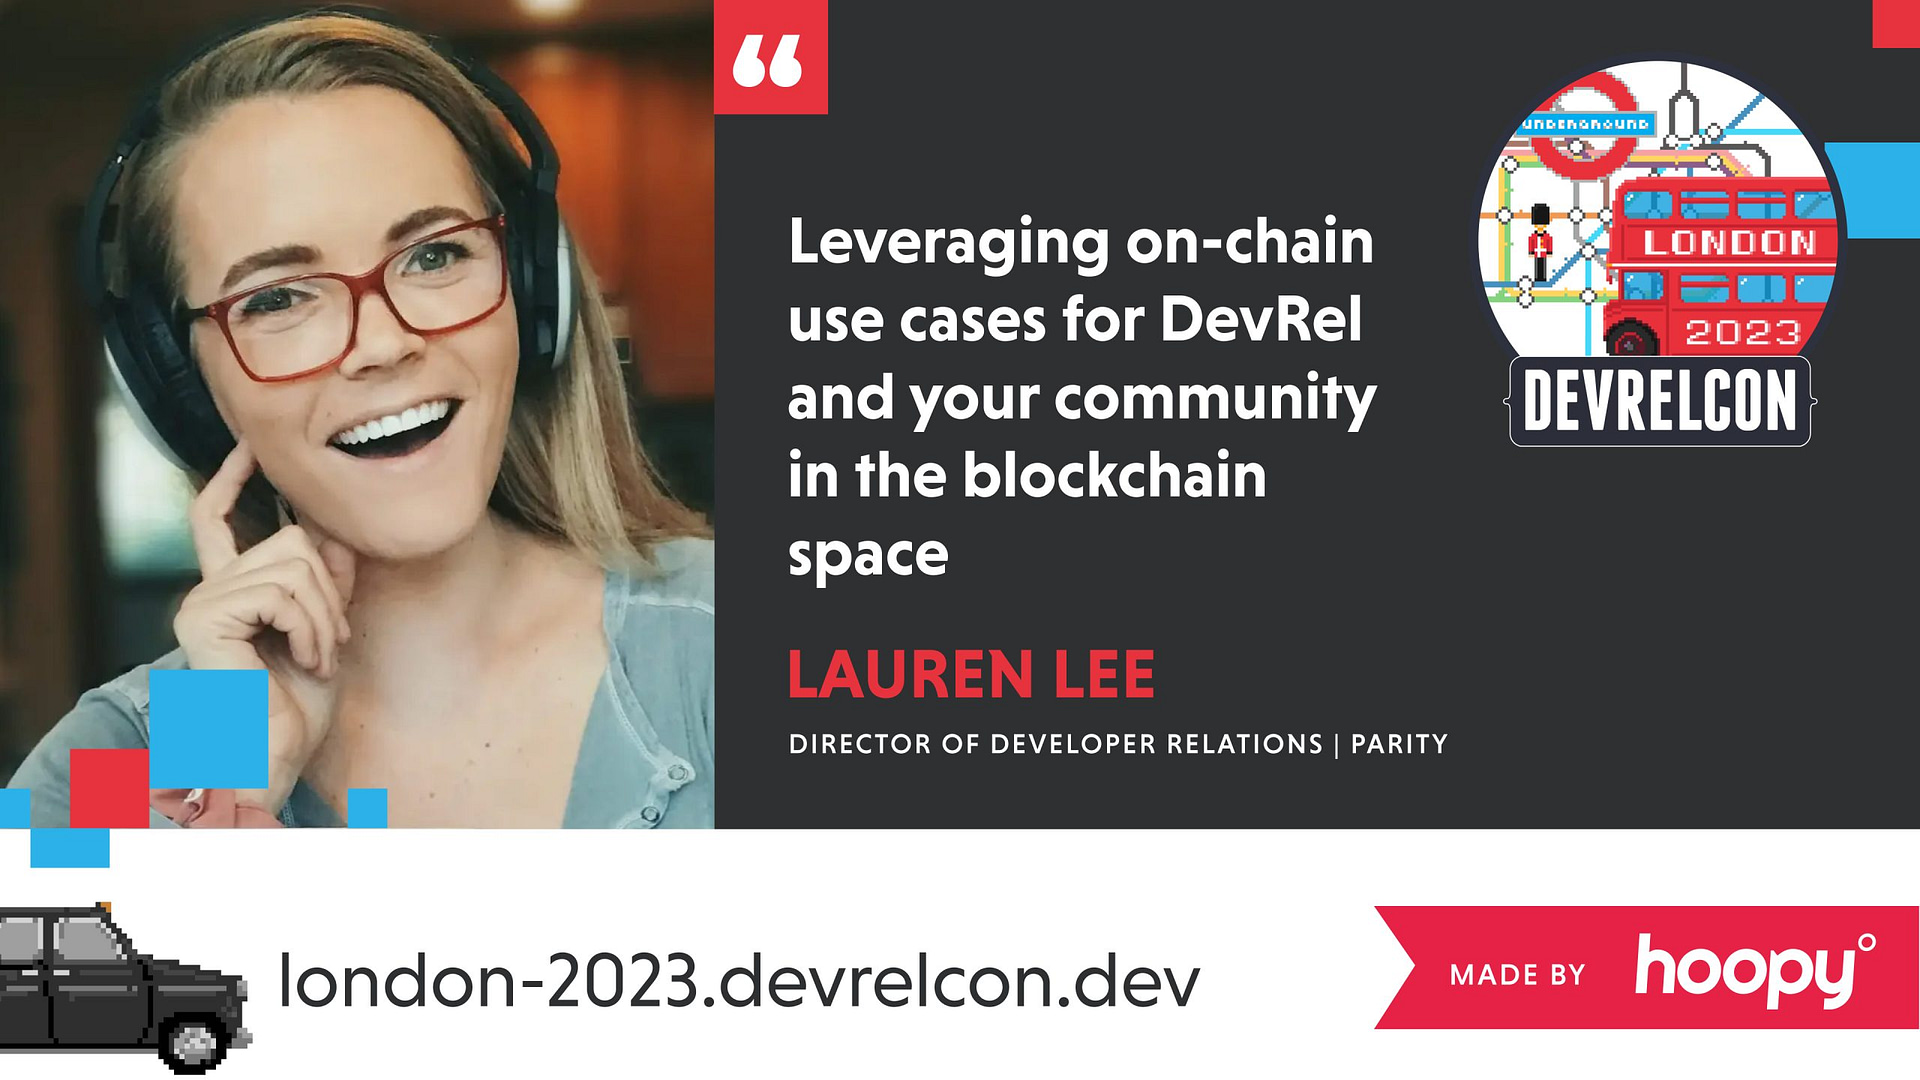 The image is a promotional graphic for a talk given by Lauren Lee at DevRelCon London 2023. The graphic features a photo of Lauren Lee, who is smiling and wearing headphones and glasses. She appears to be engaged in a conversation, with her hand on her cheek and a cheerful expression. The text alongside her reads "Leveraging on-chain use cases for DevRel and your community in the blockchain space," indicating the topic of her talk. Lauren Lee is identified as the Director of Developer Relations at Parity. The graphic includes the DevRelCon logo with a stylized London bus and the year 2023, as well as the URL "london-2023.devrelcon.dev" at the bottom. The lower right corner contains the logo of Hoopy, presumably the creator of the graphic or a sponsor of the event. The overall design has a professional and modern aesthetic, suitable for an industry conference.